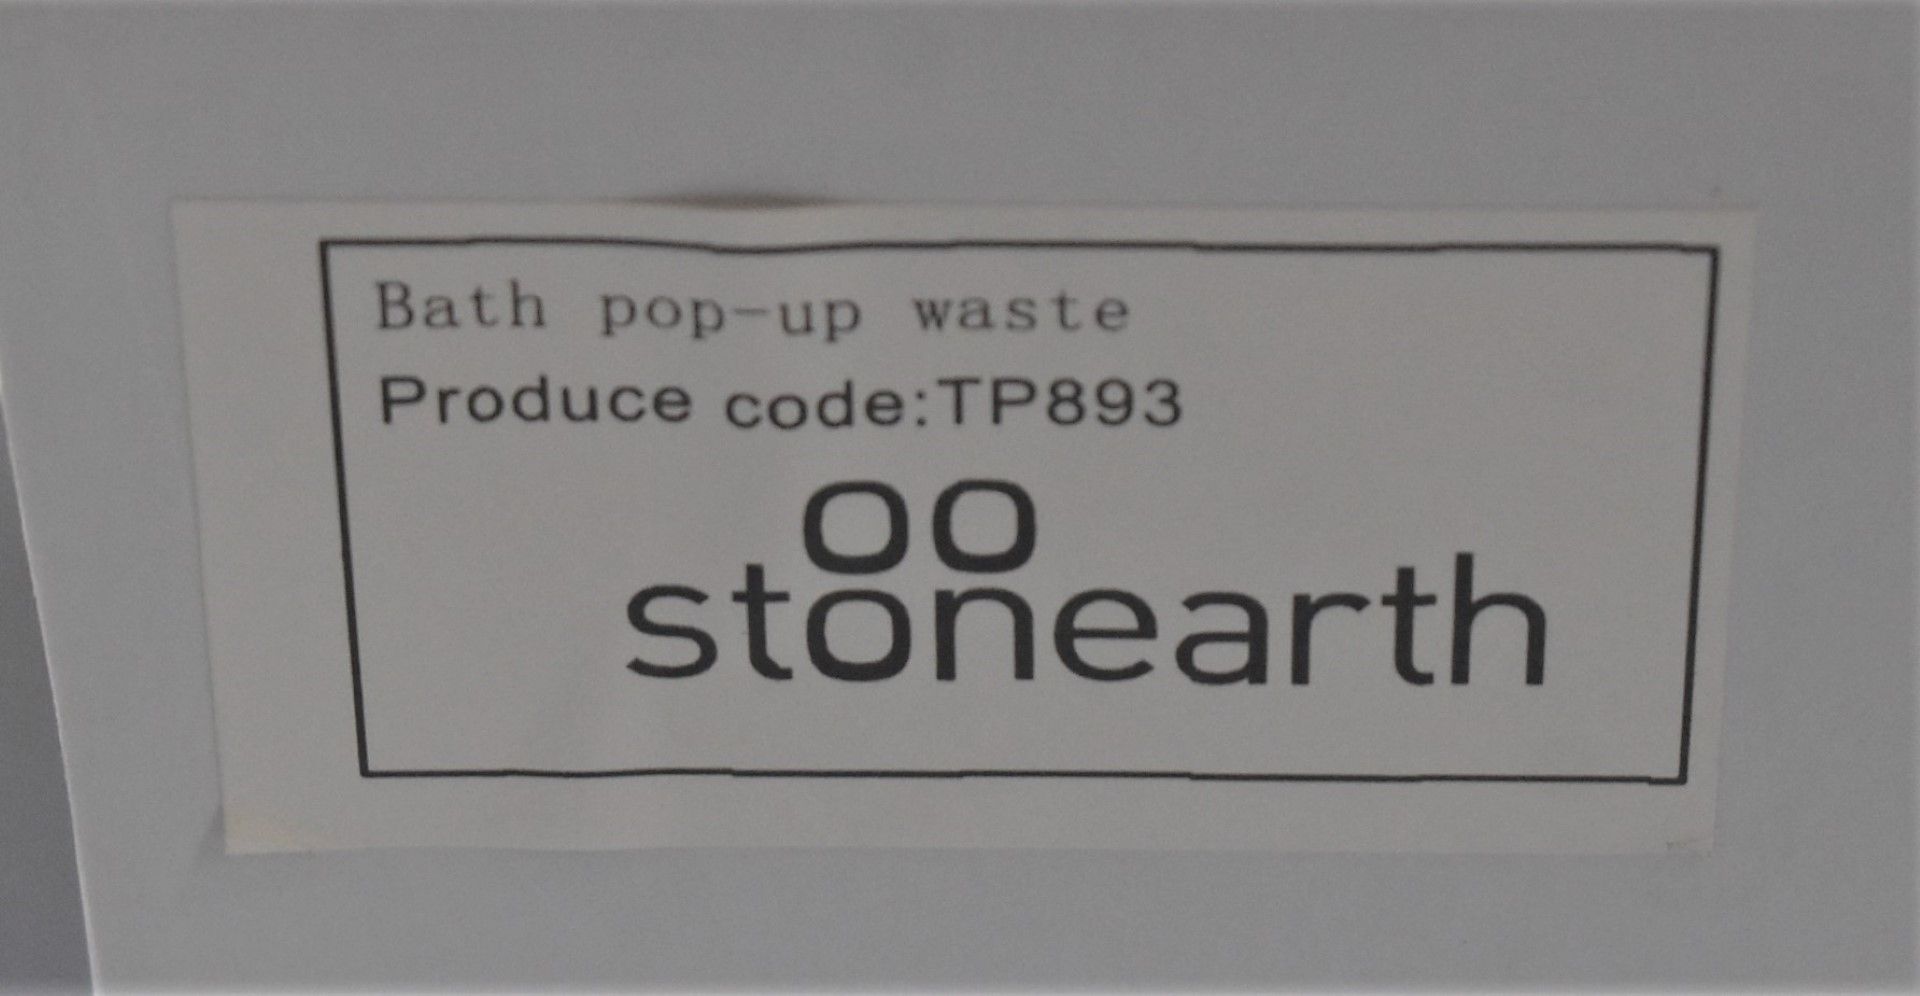 1 x Stonearth Bath Waste Kit With Stainless Steel Covers - Brand New & Boxed - RRP £125 - Ref: TP893 - Image 7 of 7